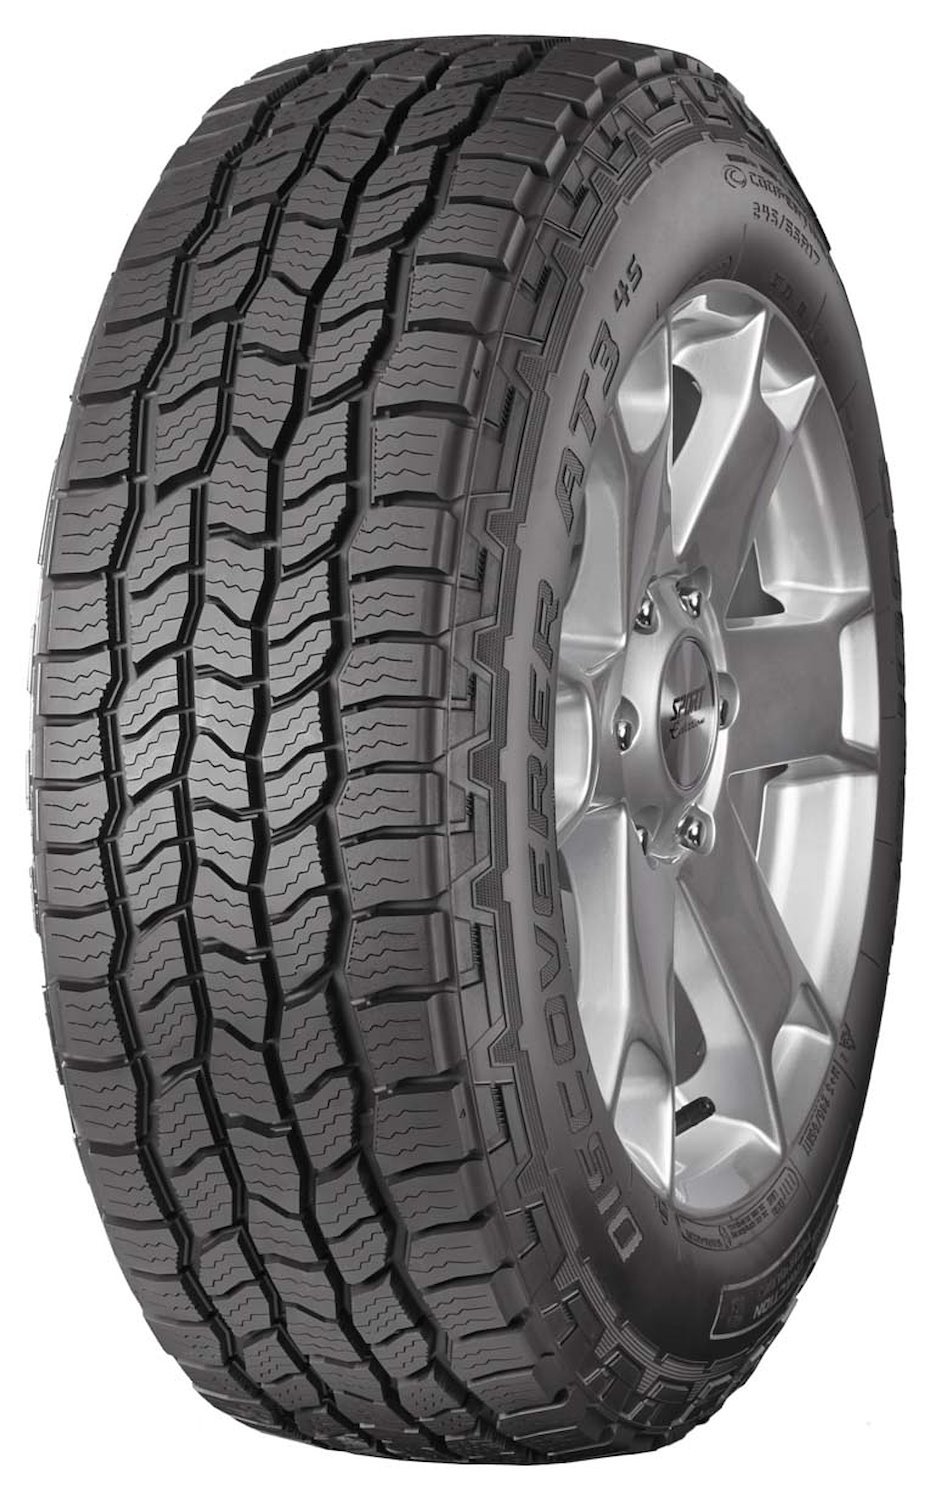 Discoverer AT3 4S All-Terrain Tire, 265/75R15